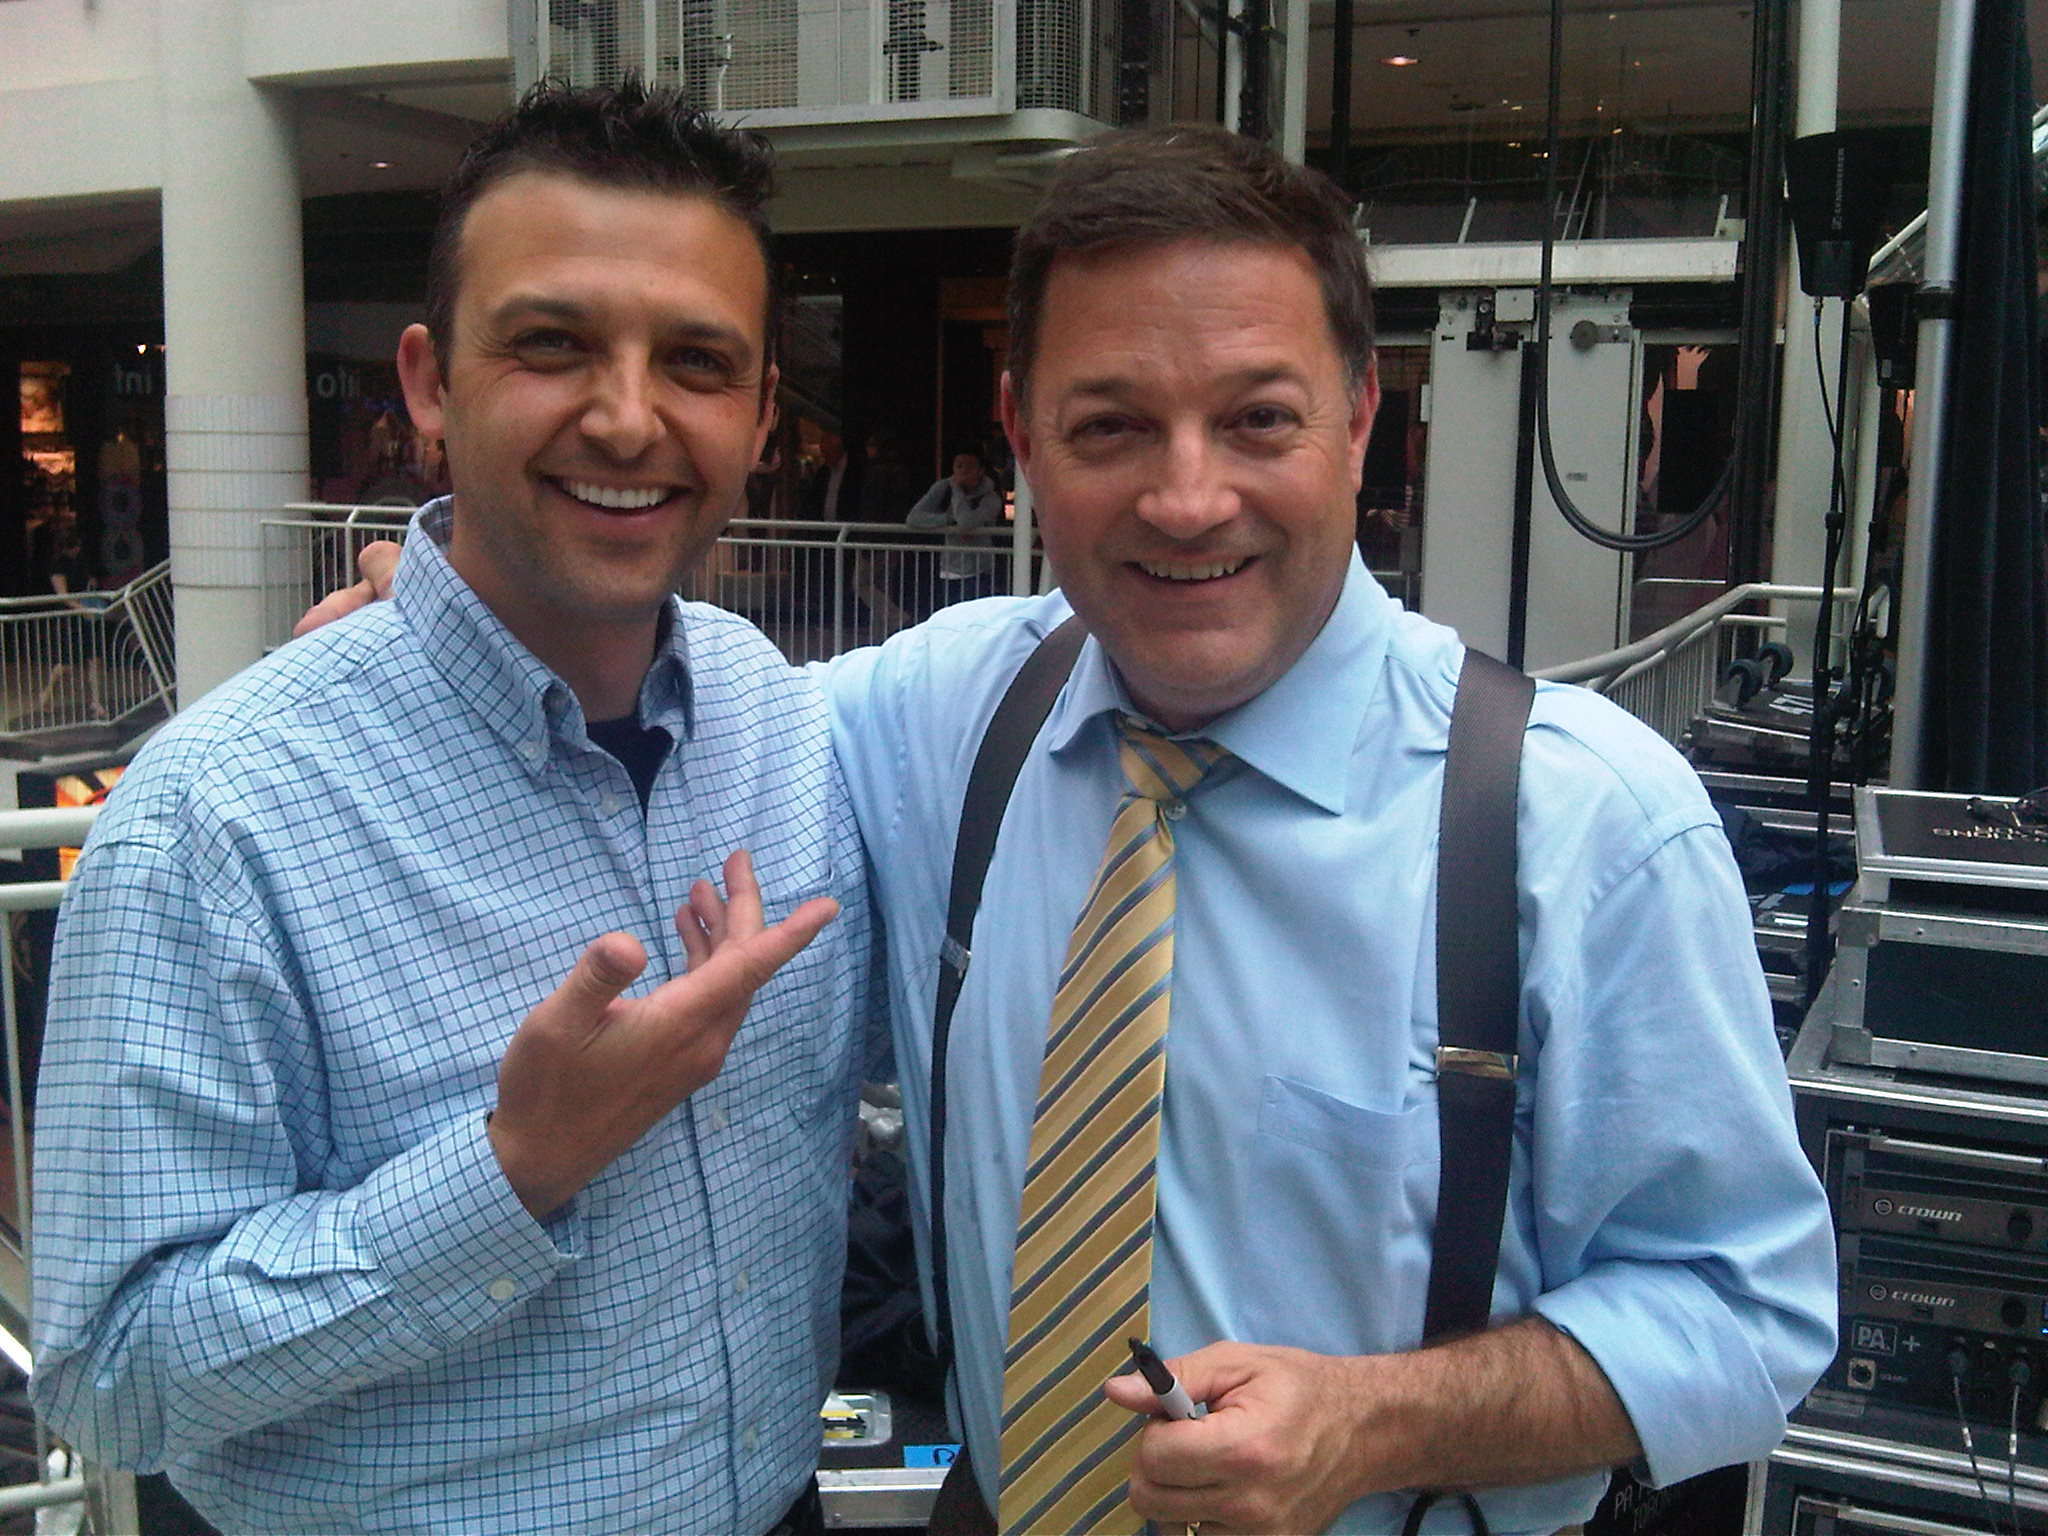 William Lucas with Kevin Frankish from Toronto's very own Breakfast Television